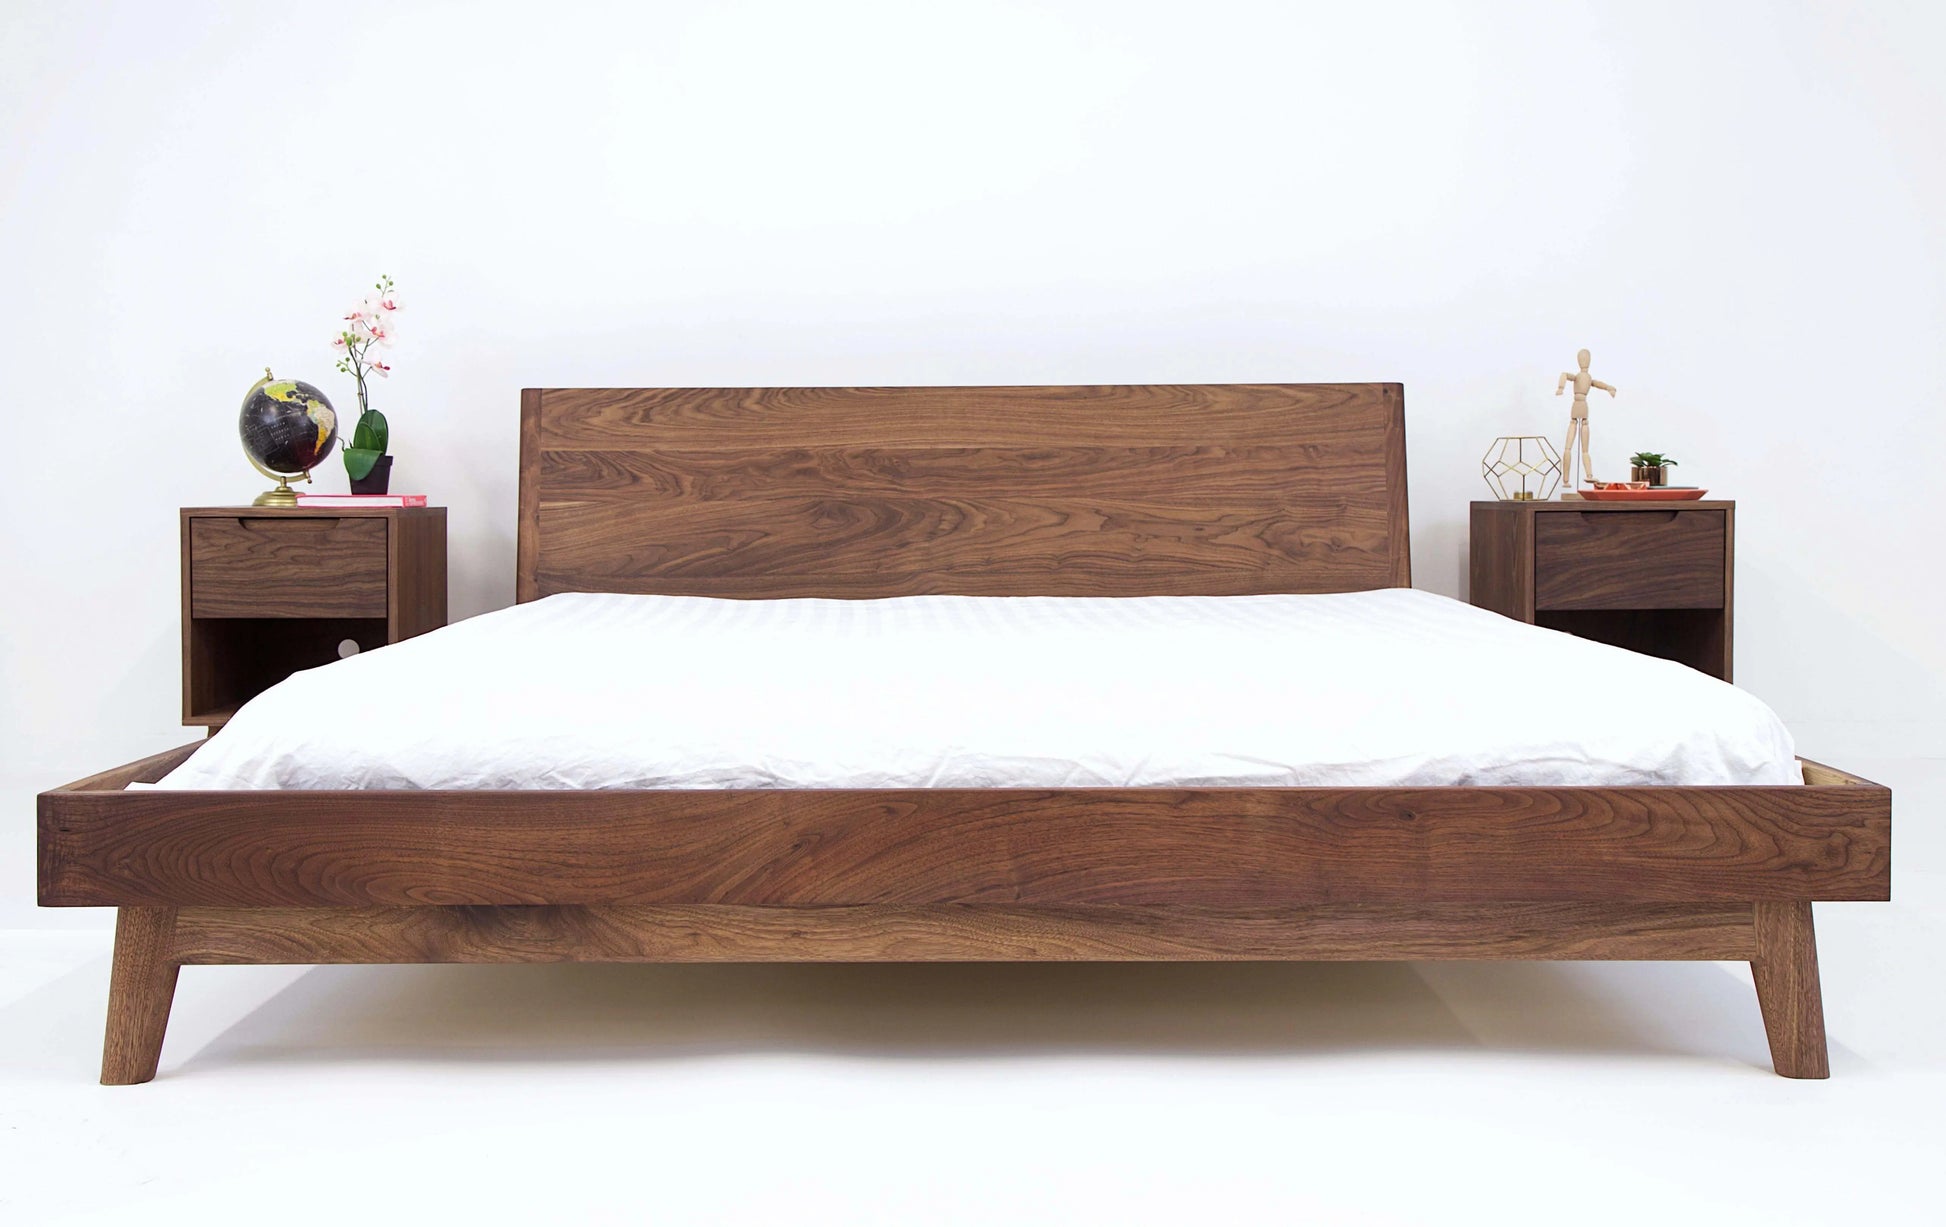 Iconic Walnut Mid Century Bed: The Bosco Handcrafted Masterpiece